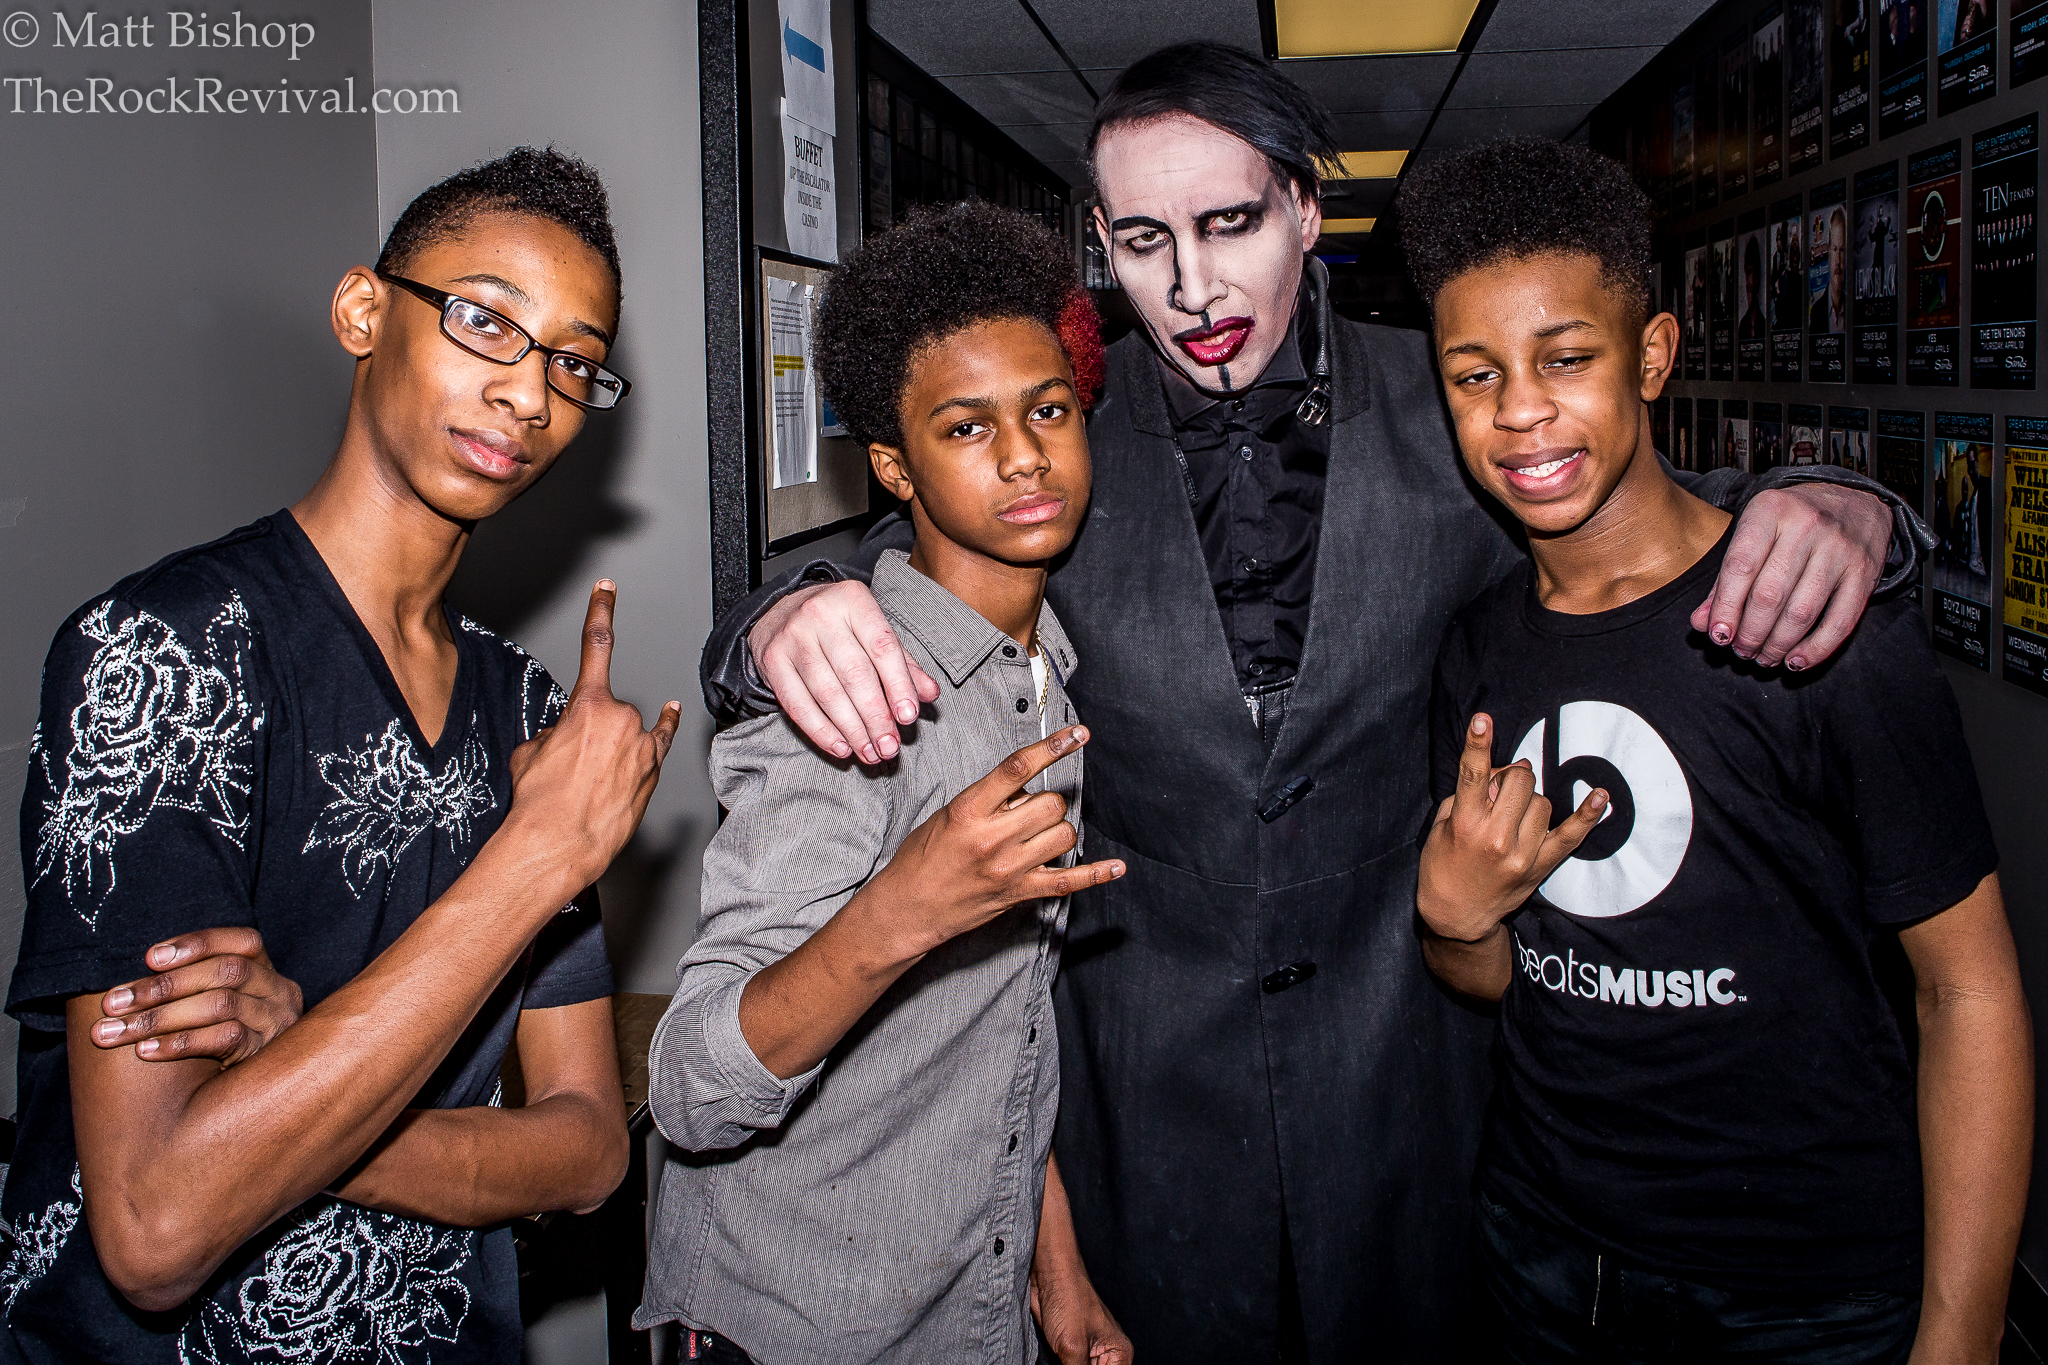 MARILYN MANSON PERFORMS HIS CLASSIC HIT “THE BEAUTIFUL PEOPLE” WITH UNLOCKING THE TRUTH